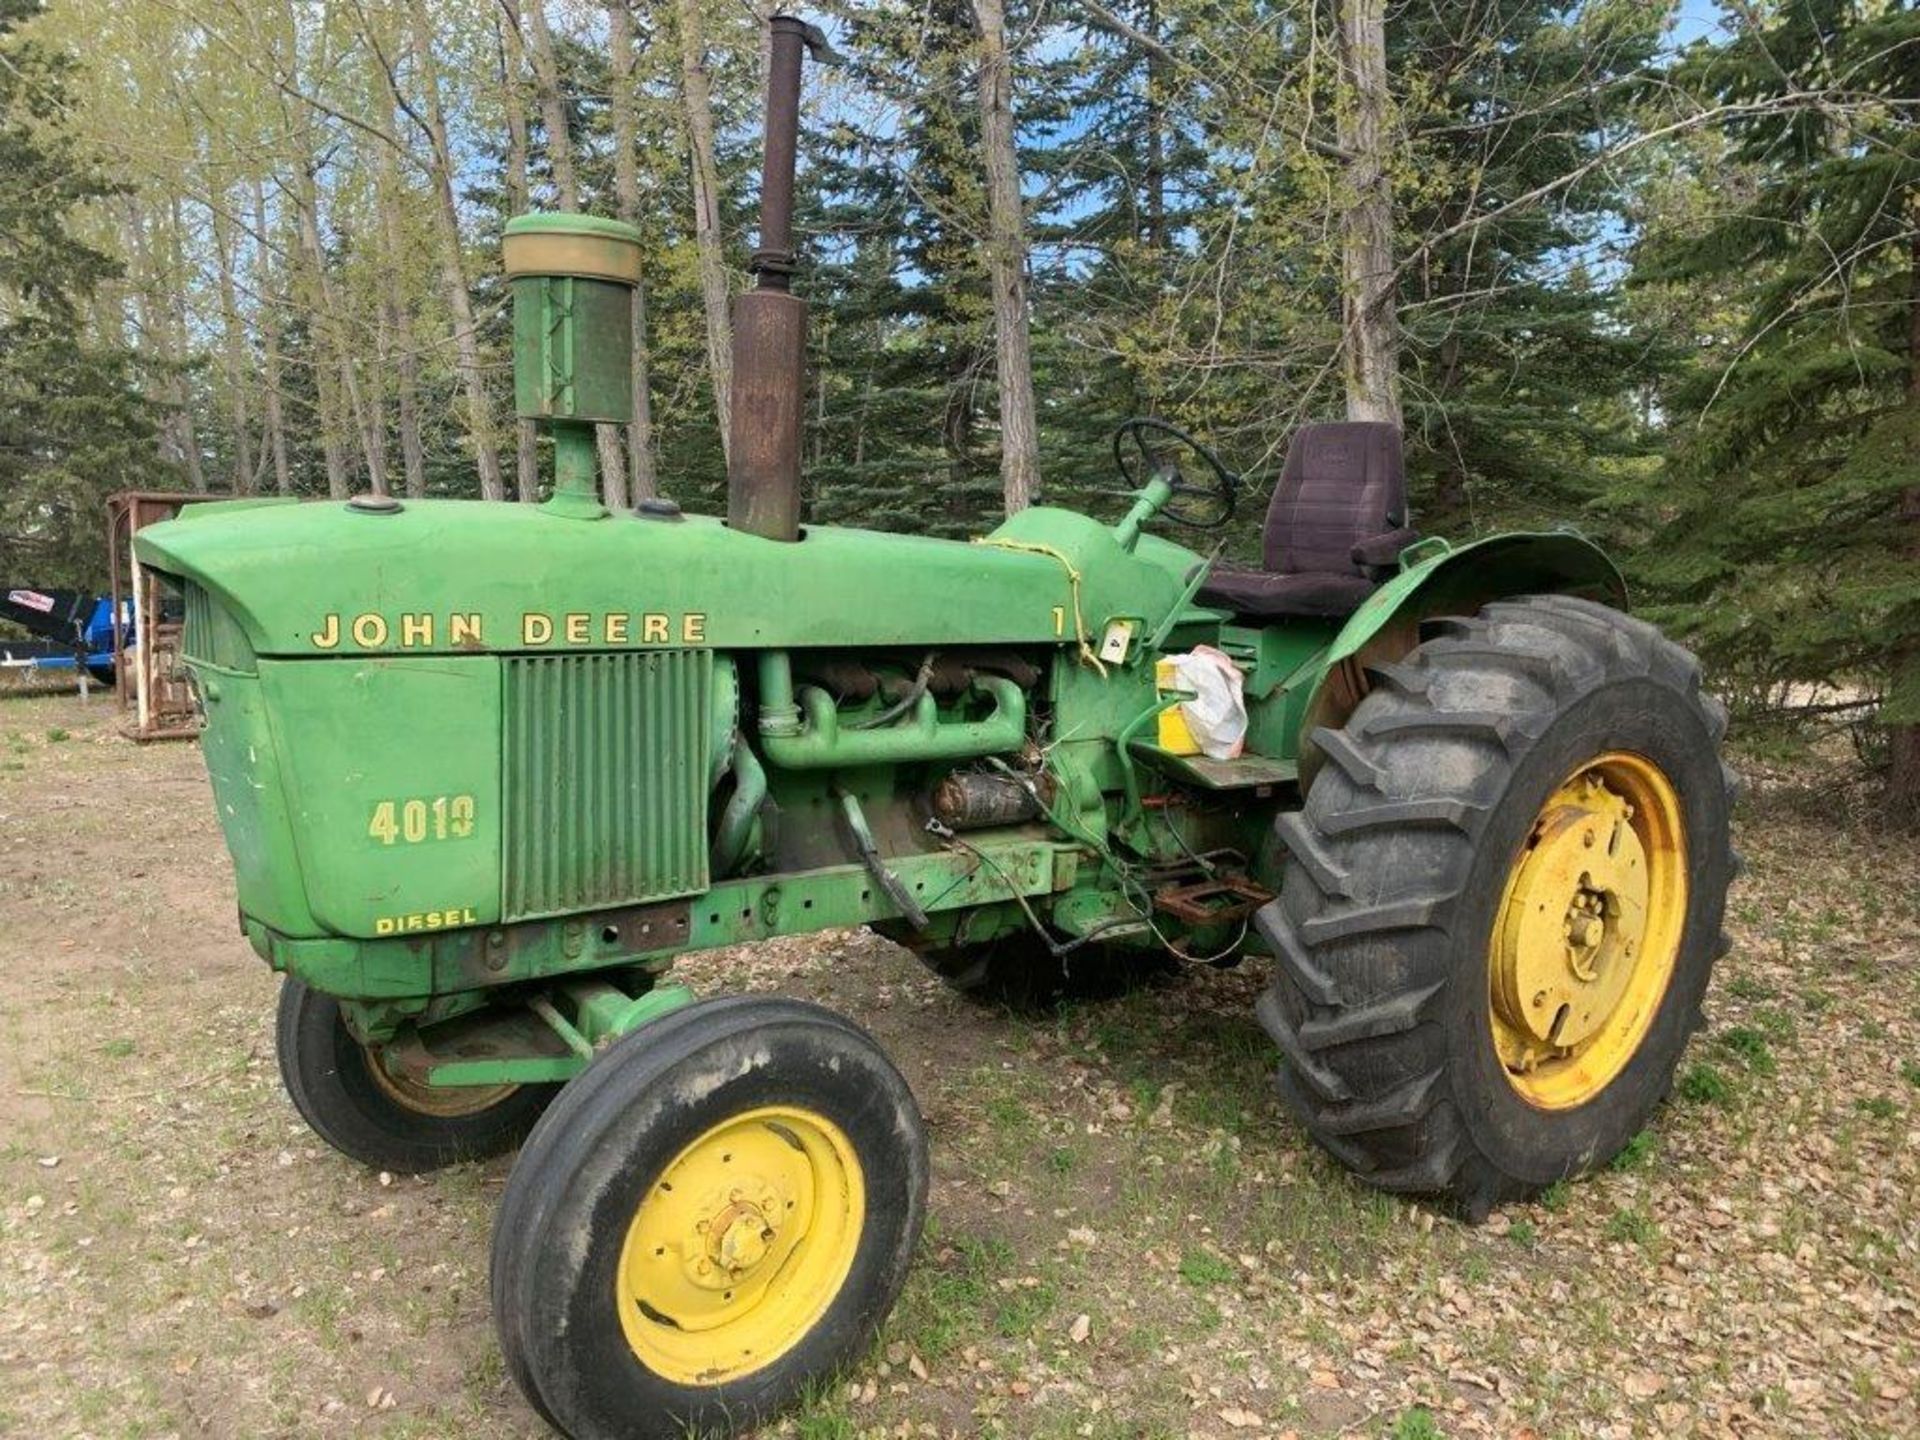 JOHN DEERE 4010 TRACTOR, DIESEL, 2WD, 18.4-34 R1 RUBBER (GOOD CONDITION), 540 PTO, S/N 401022T3600